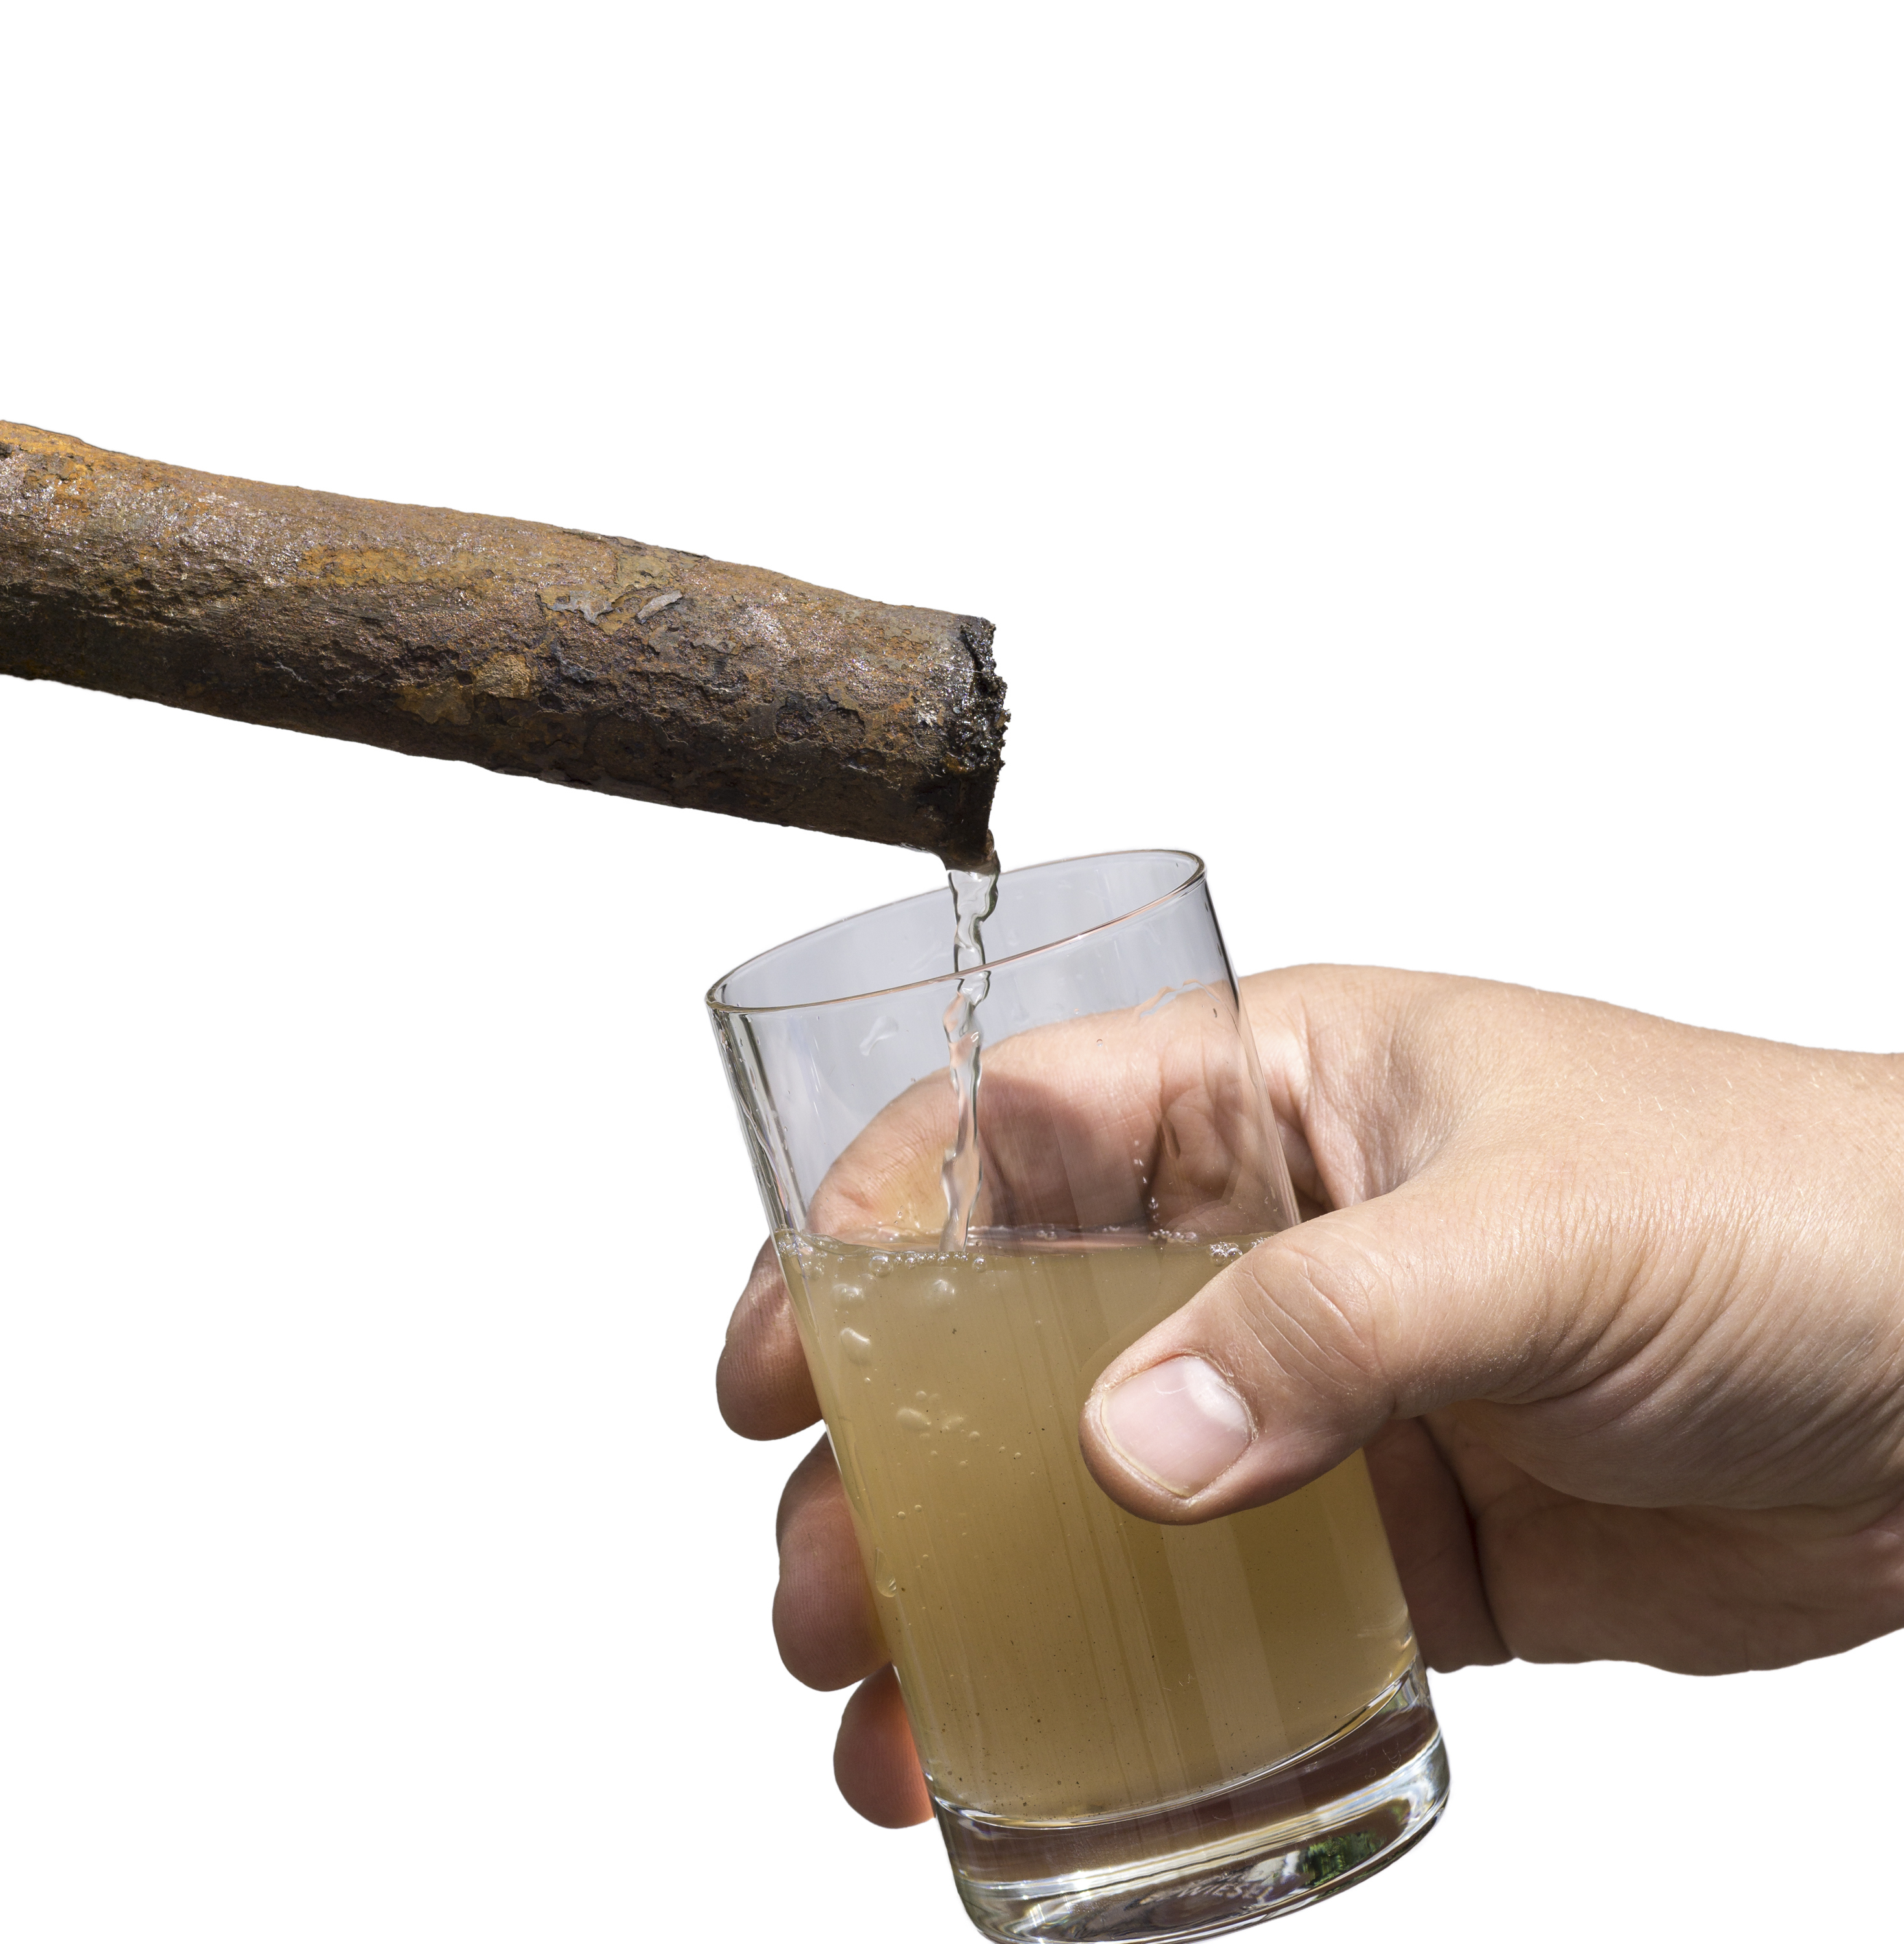 Rusty pipe pouring contaminated water into a glass held by a hand